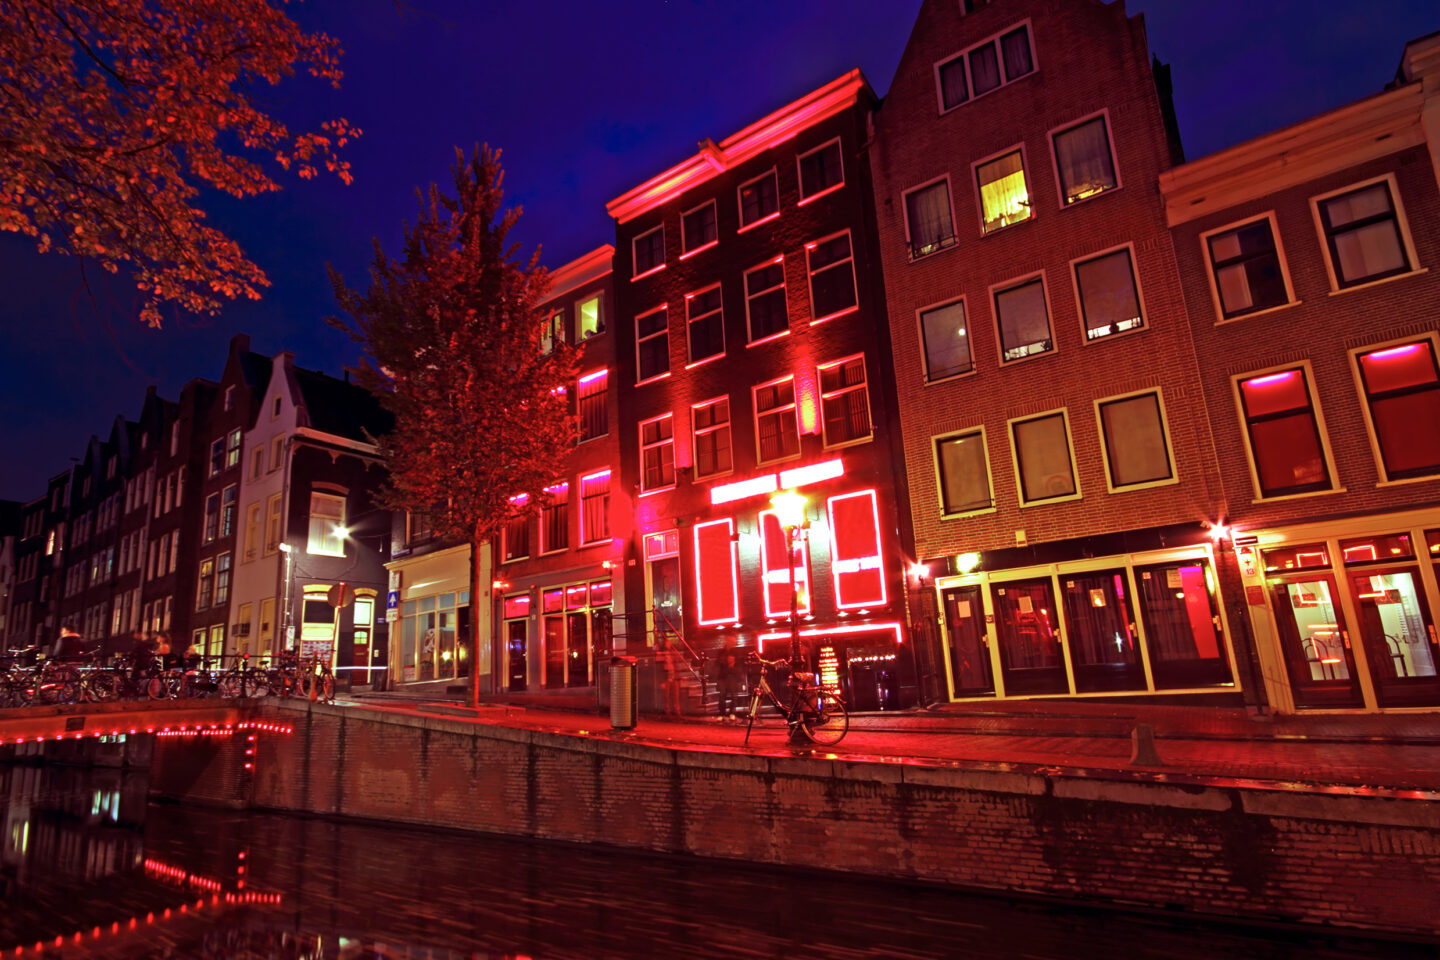 Ban on Outdoor Pot Smoking in Amsterdam’s Red Light District To Begin This Month